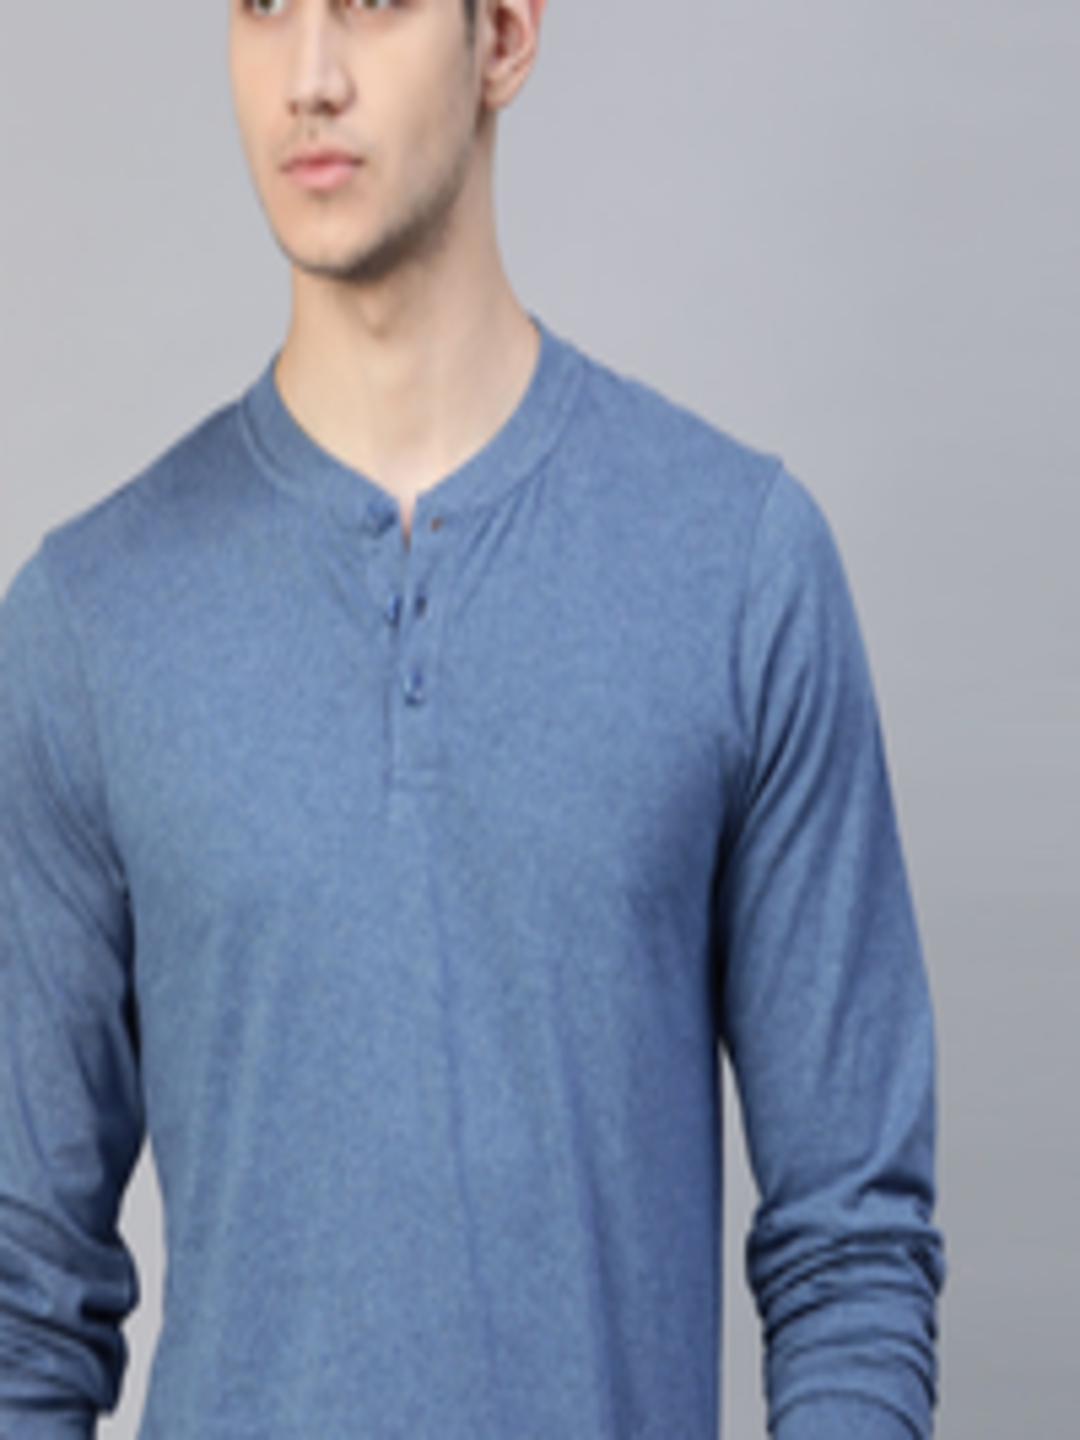 Buy The Roadster Lifestyle Co Men Blue Solid Henley Neck Pure Cotton T ...